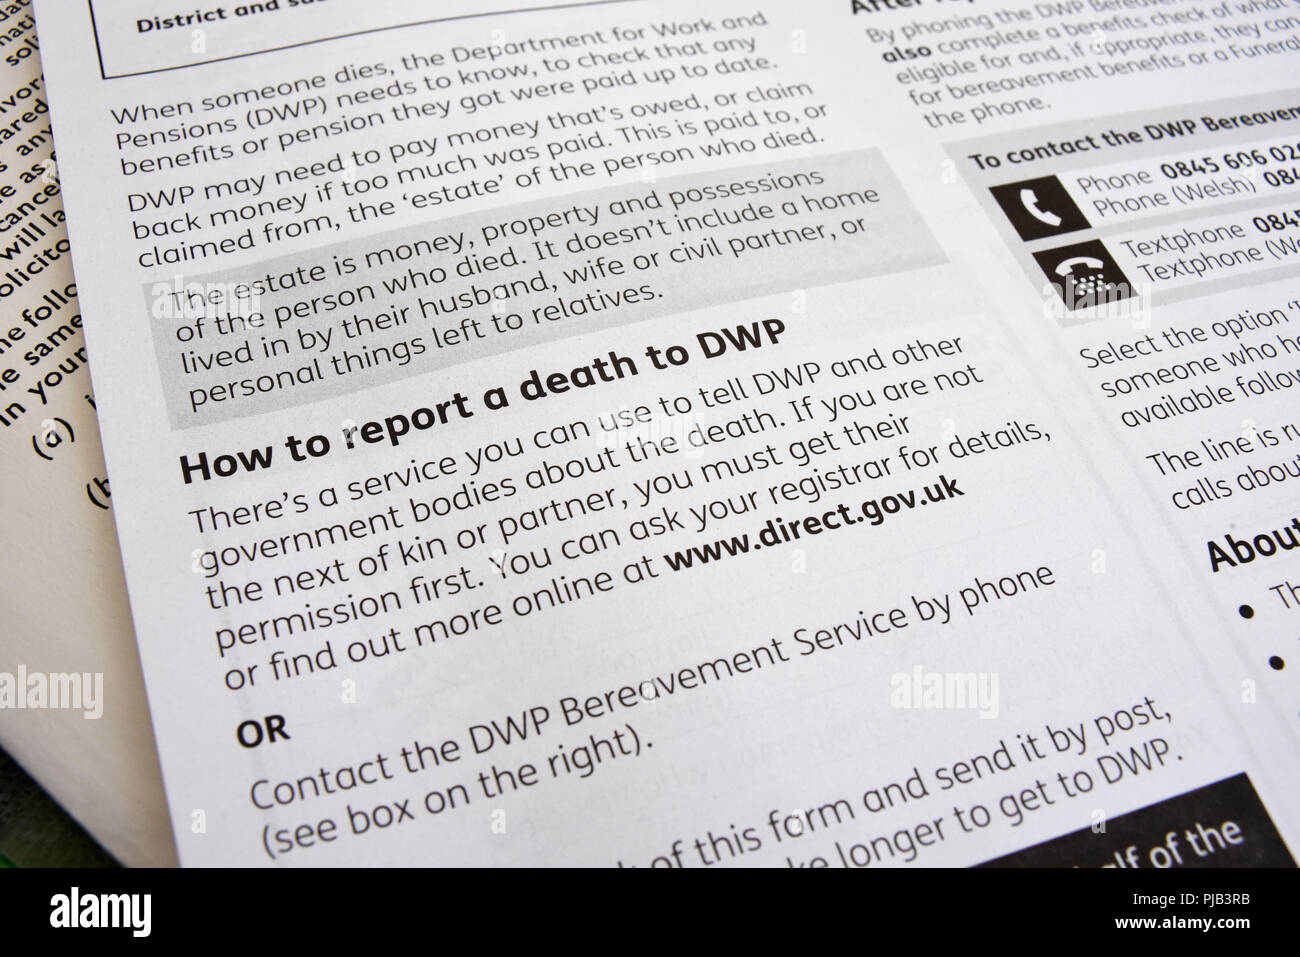 How to report a death to DWP paperwork. Department for Work and Pensions. Bereavement service document. Contact the DWP Stock Photo